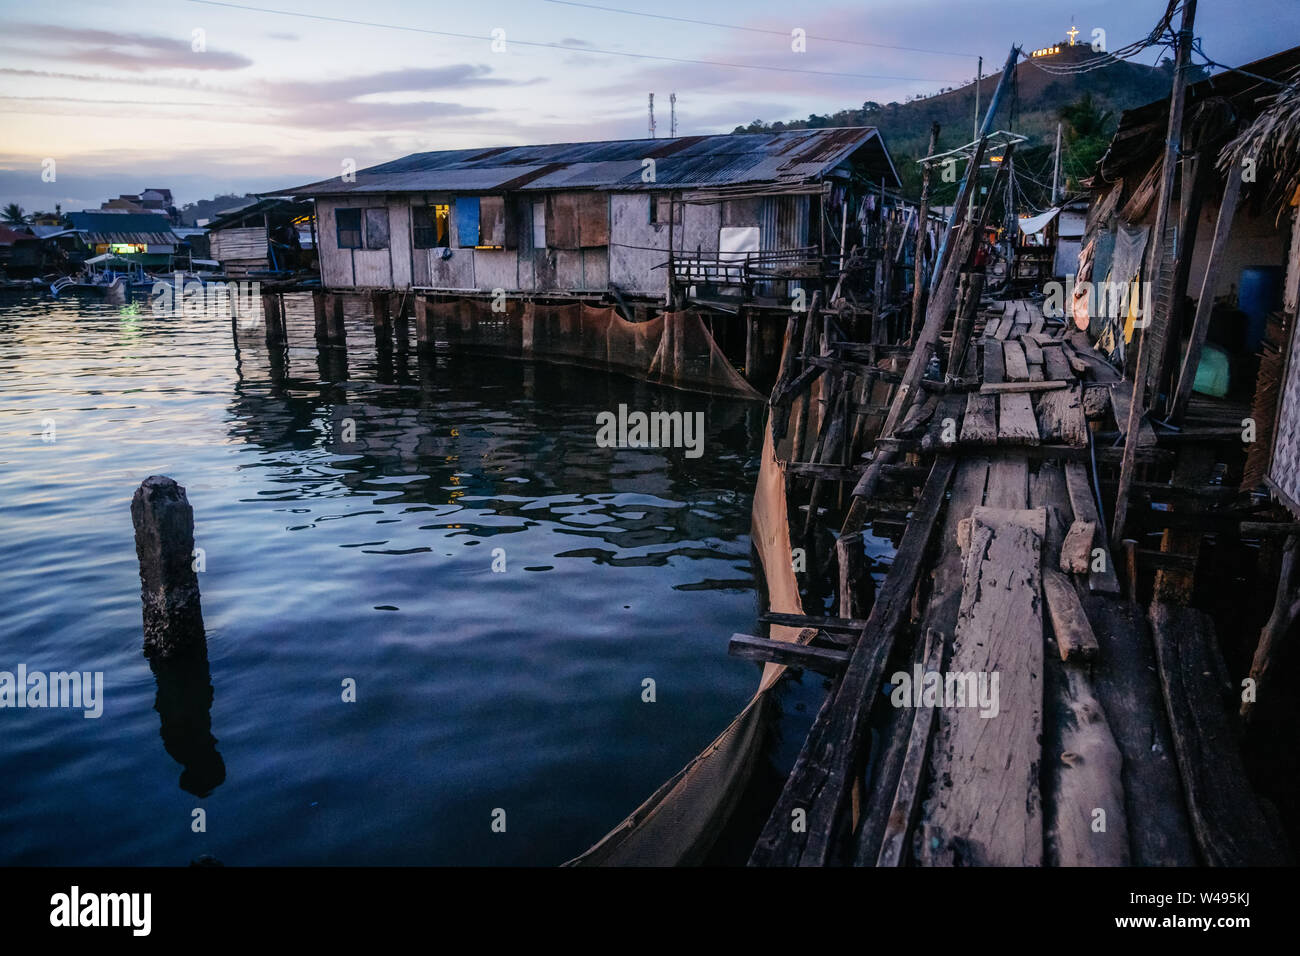 Poor district slums with wooden houses near water at dusk, Coron city, Palawan, Philippines Stock Photo